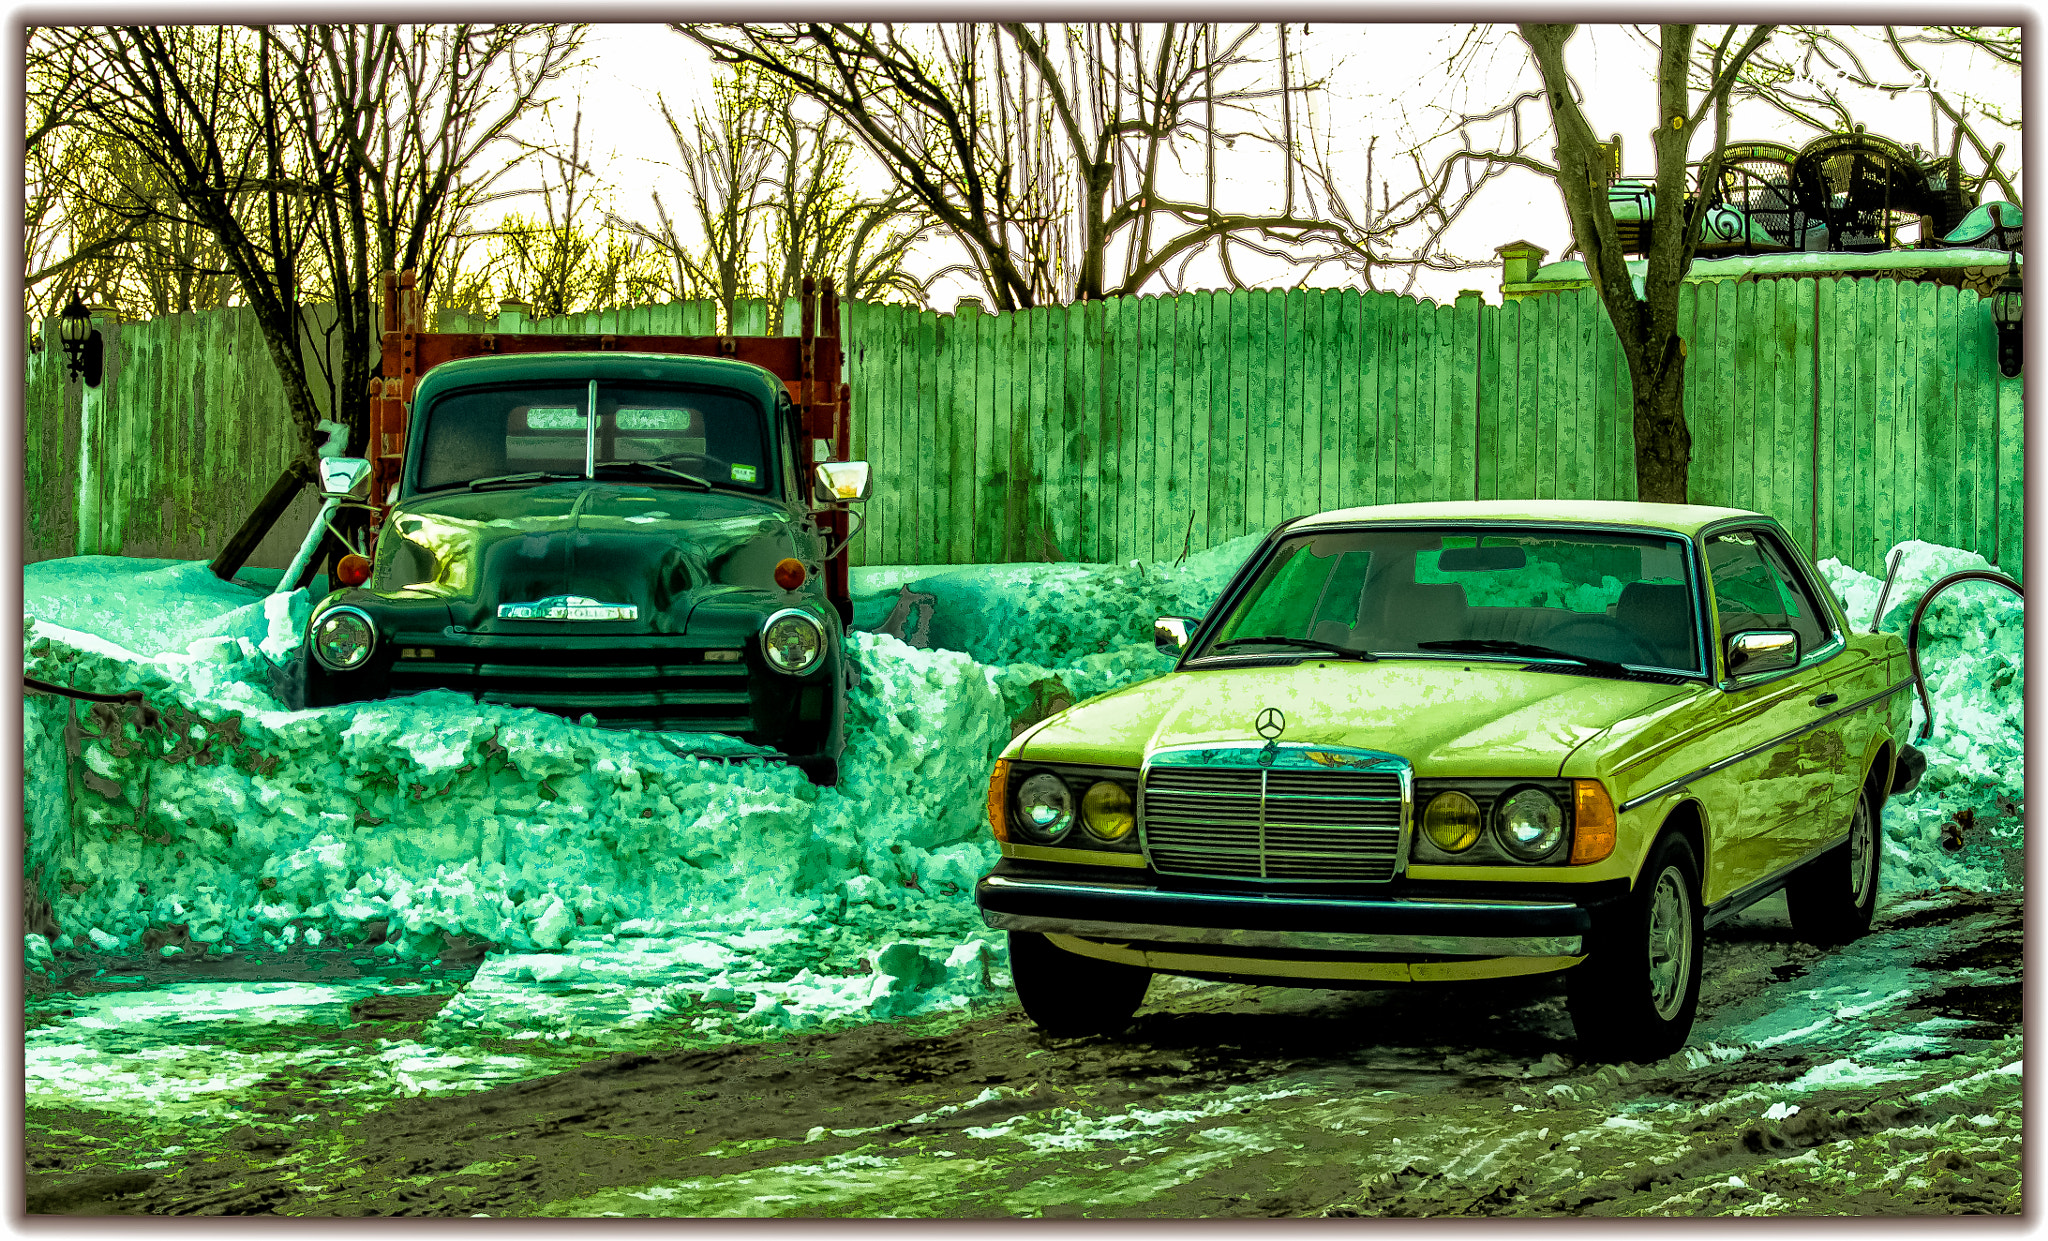 Pentax K-x + smc PENTAX-FA 28-80mm F3.5-5.6 AL sample photo. Benz and an old chevrolet truck photography